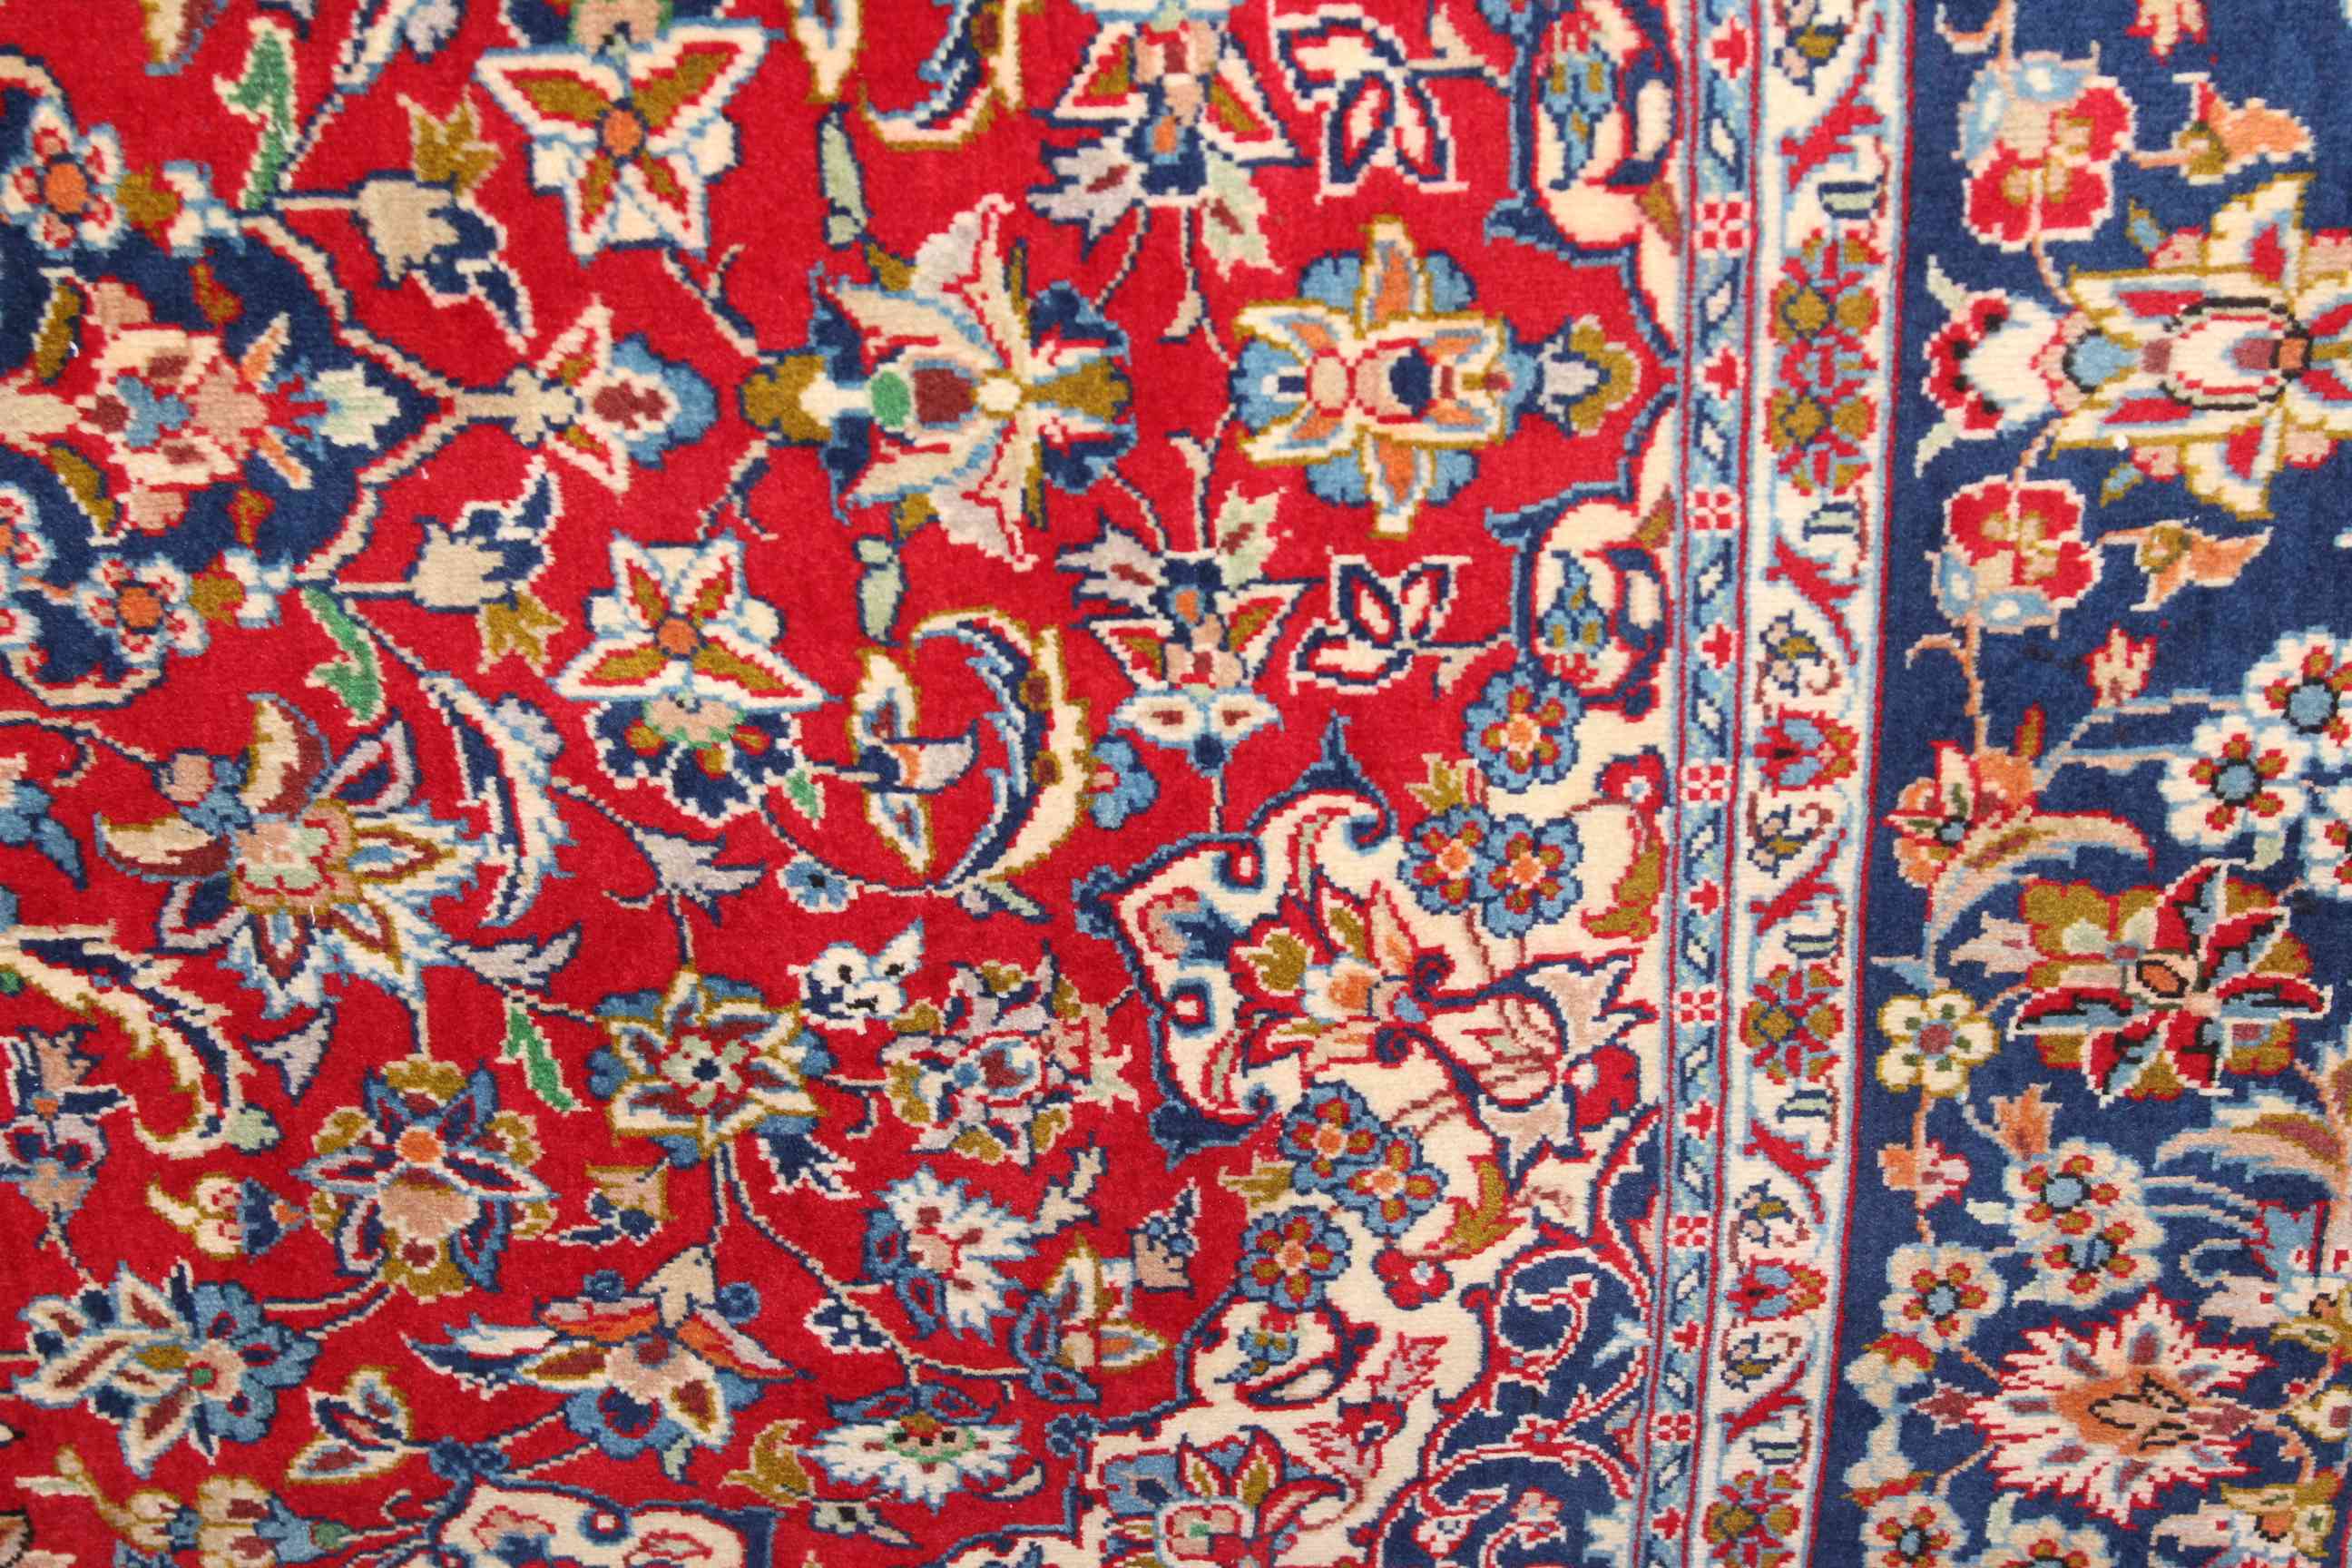 Fine hand knotted Isfahan carpet 3.12 x 2.26m. - Image 2 of 3